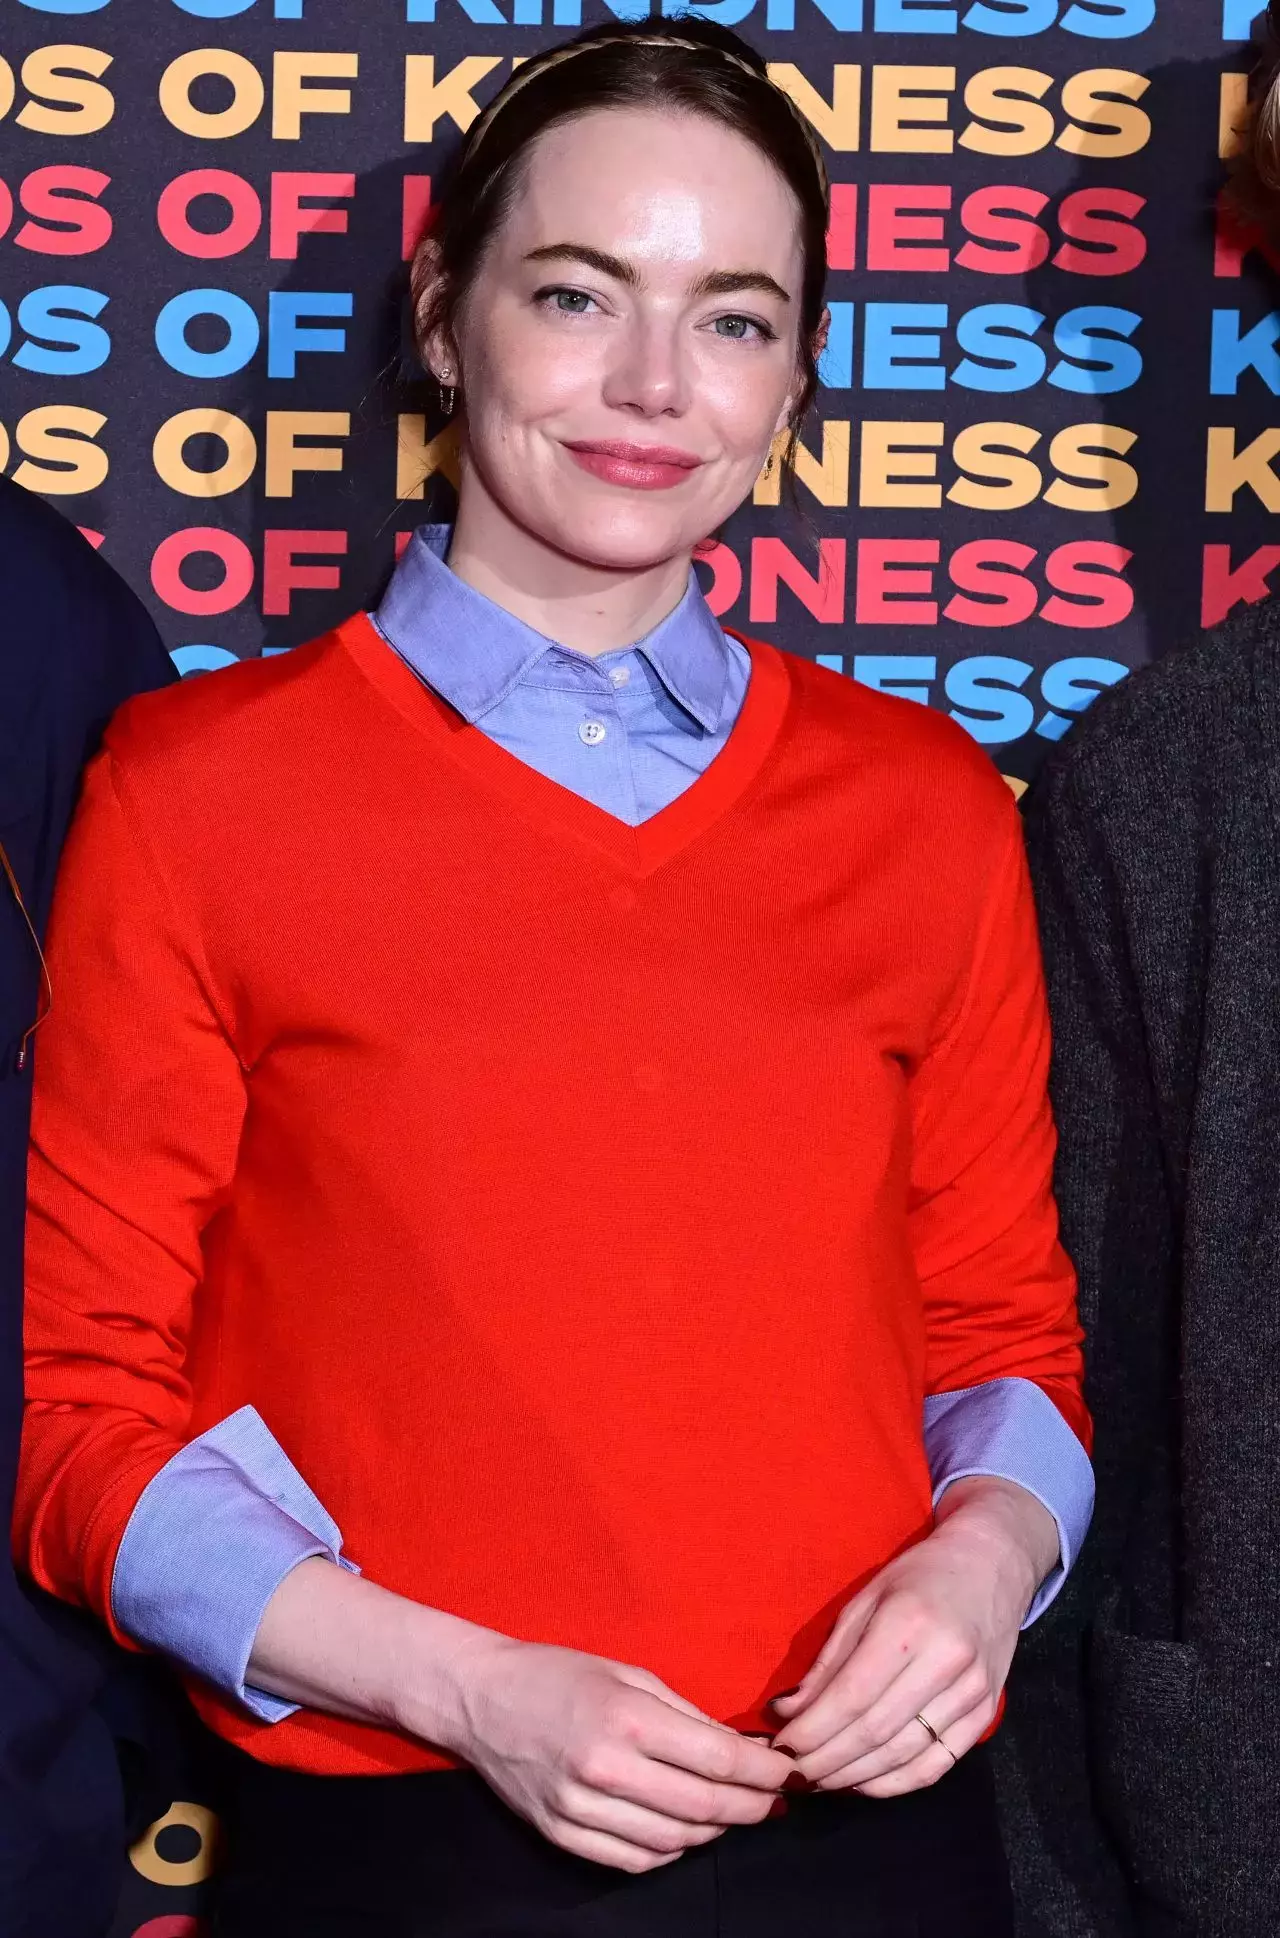 Emma Stone S Stylish Appearance At The Kinds Of Kindness Screening In London